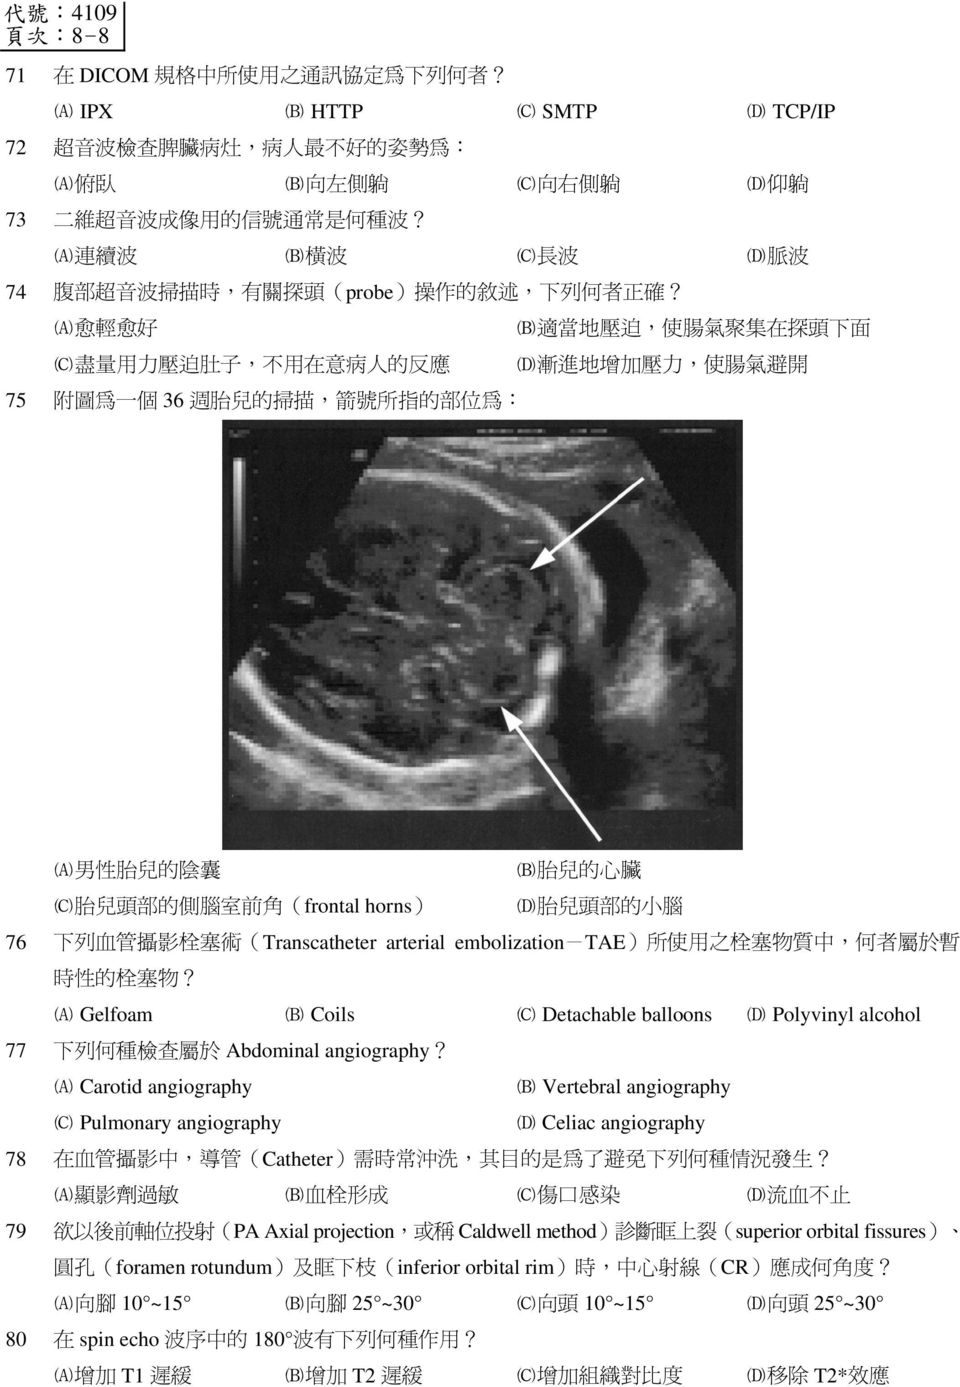 Vertebral angiography Pulmonary angiography Celiac angiography 78 Catheter 了 列 流 不 79 PA Axial projection Caldwell method